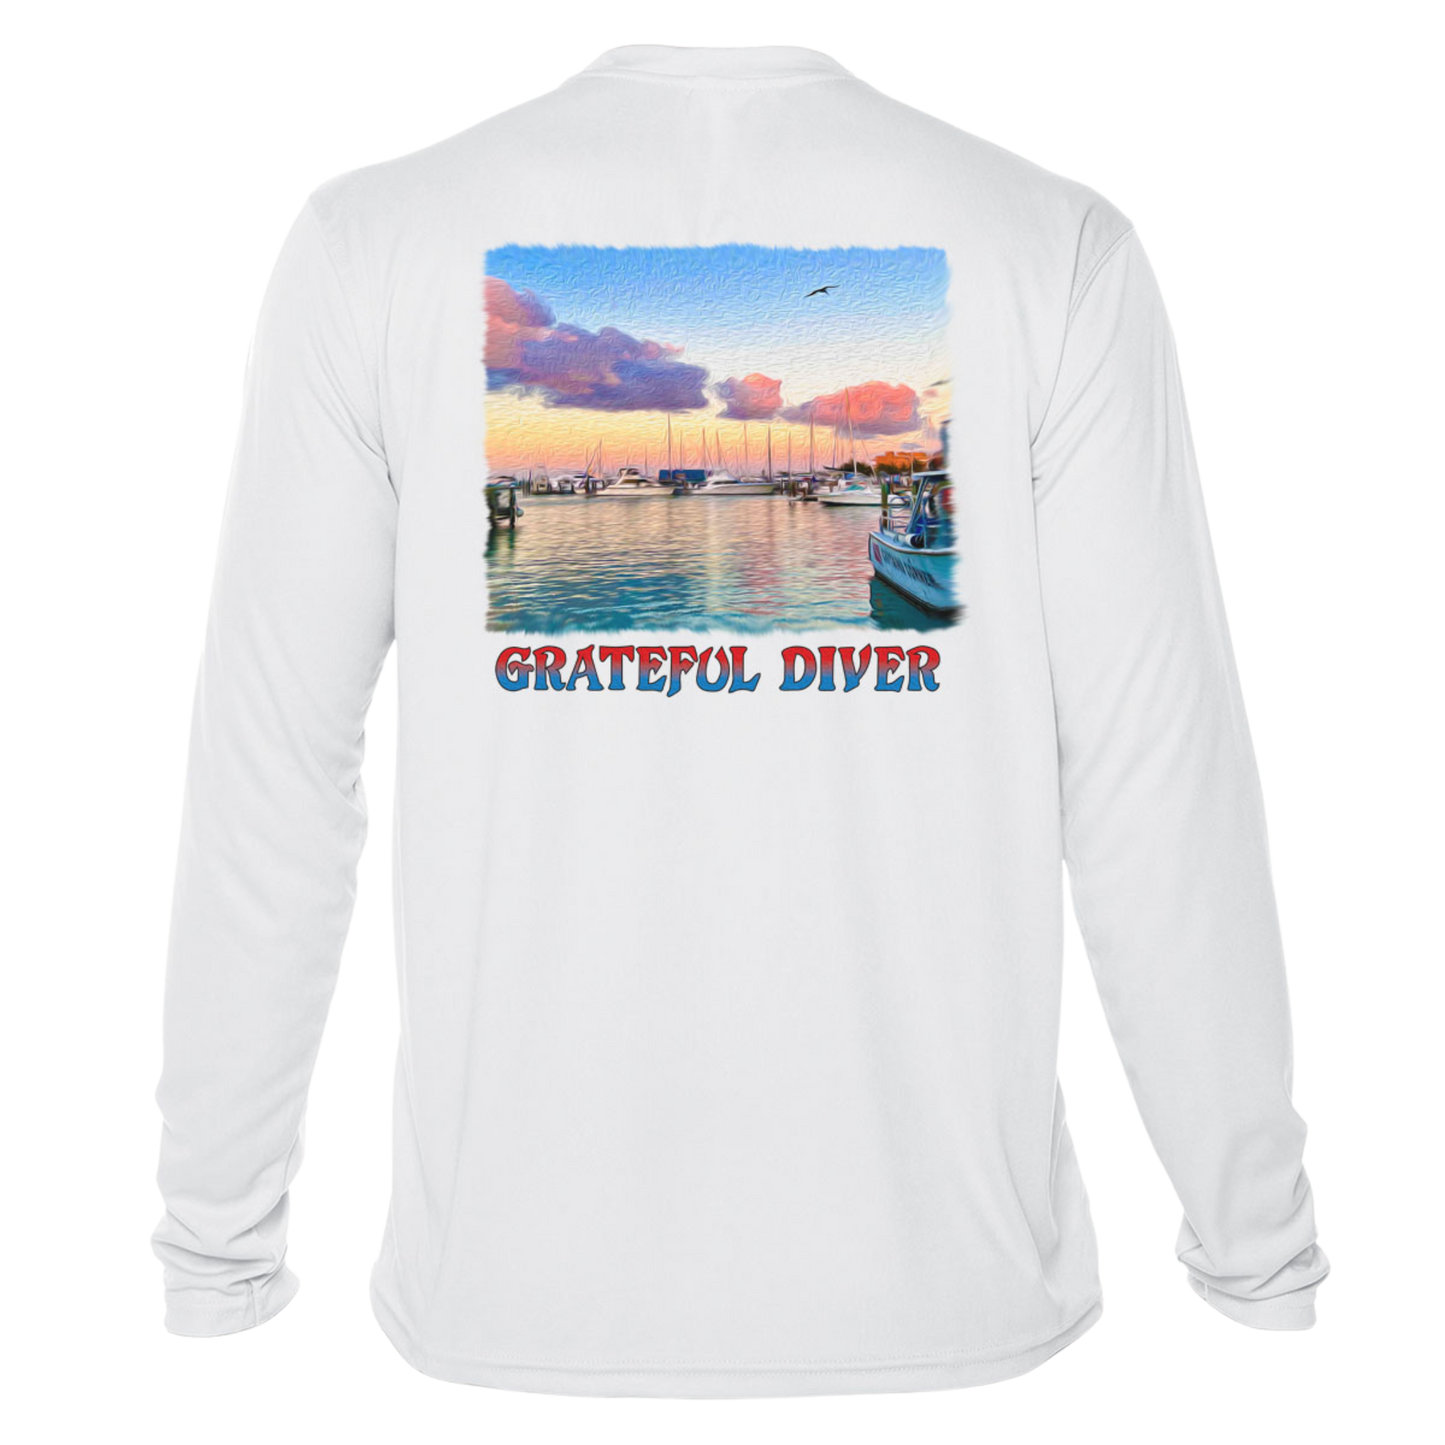 back of the Grateful Diver's Artist's Collection: Captain's Corner UV Shirt in white showing docked boats at sunrise